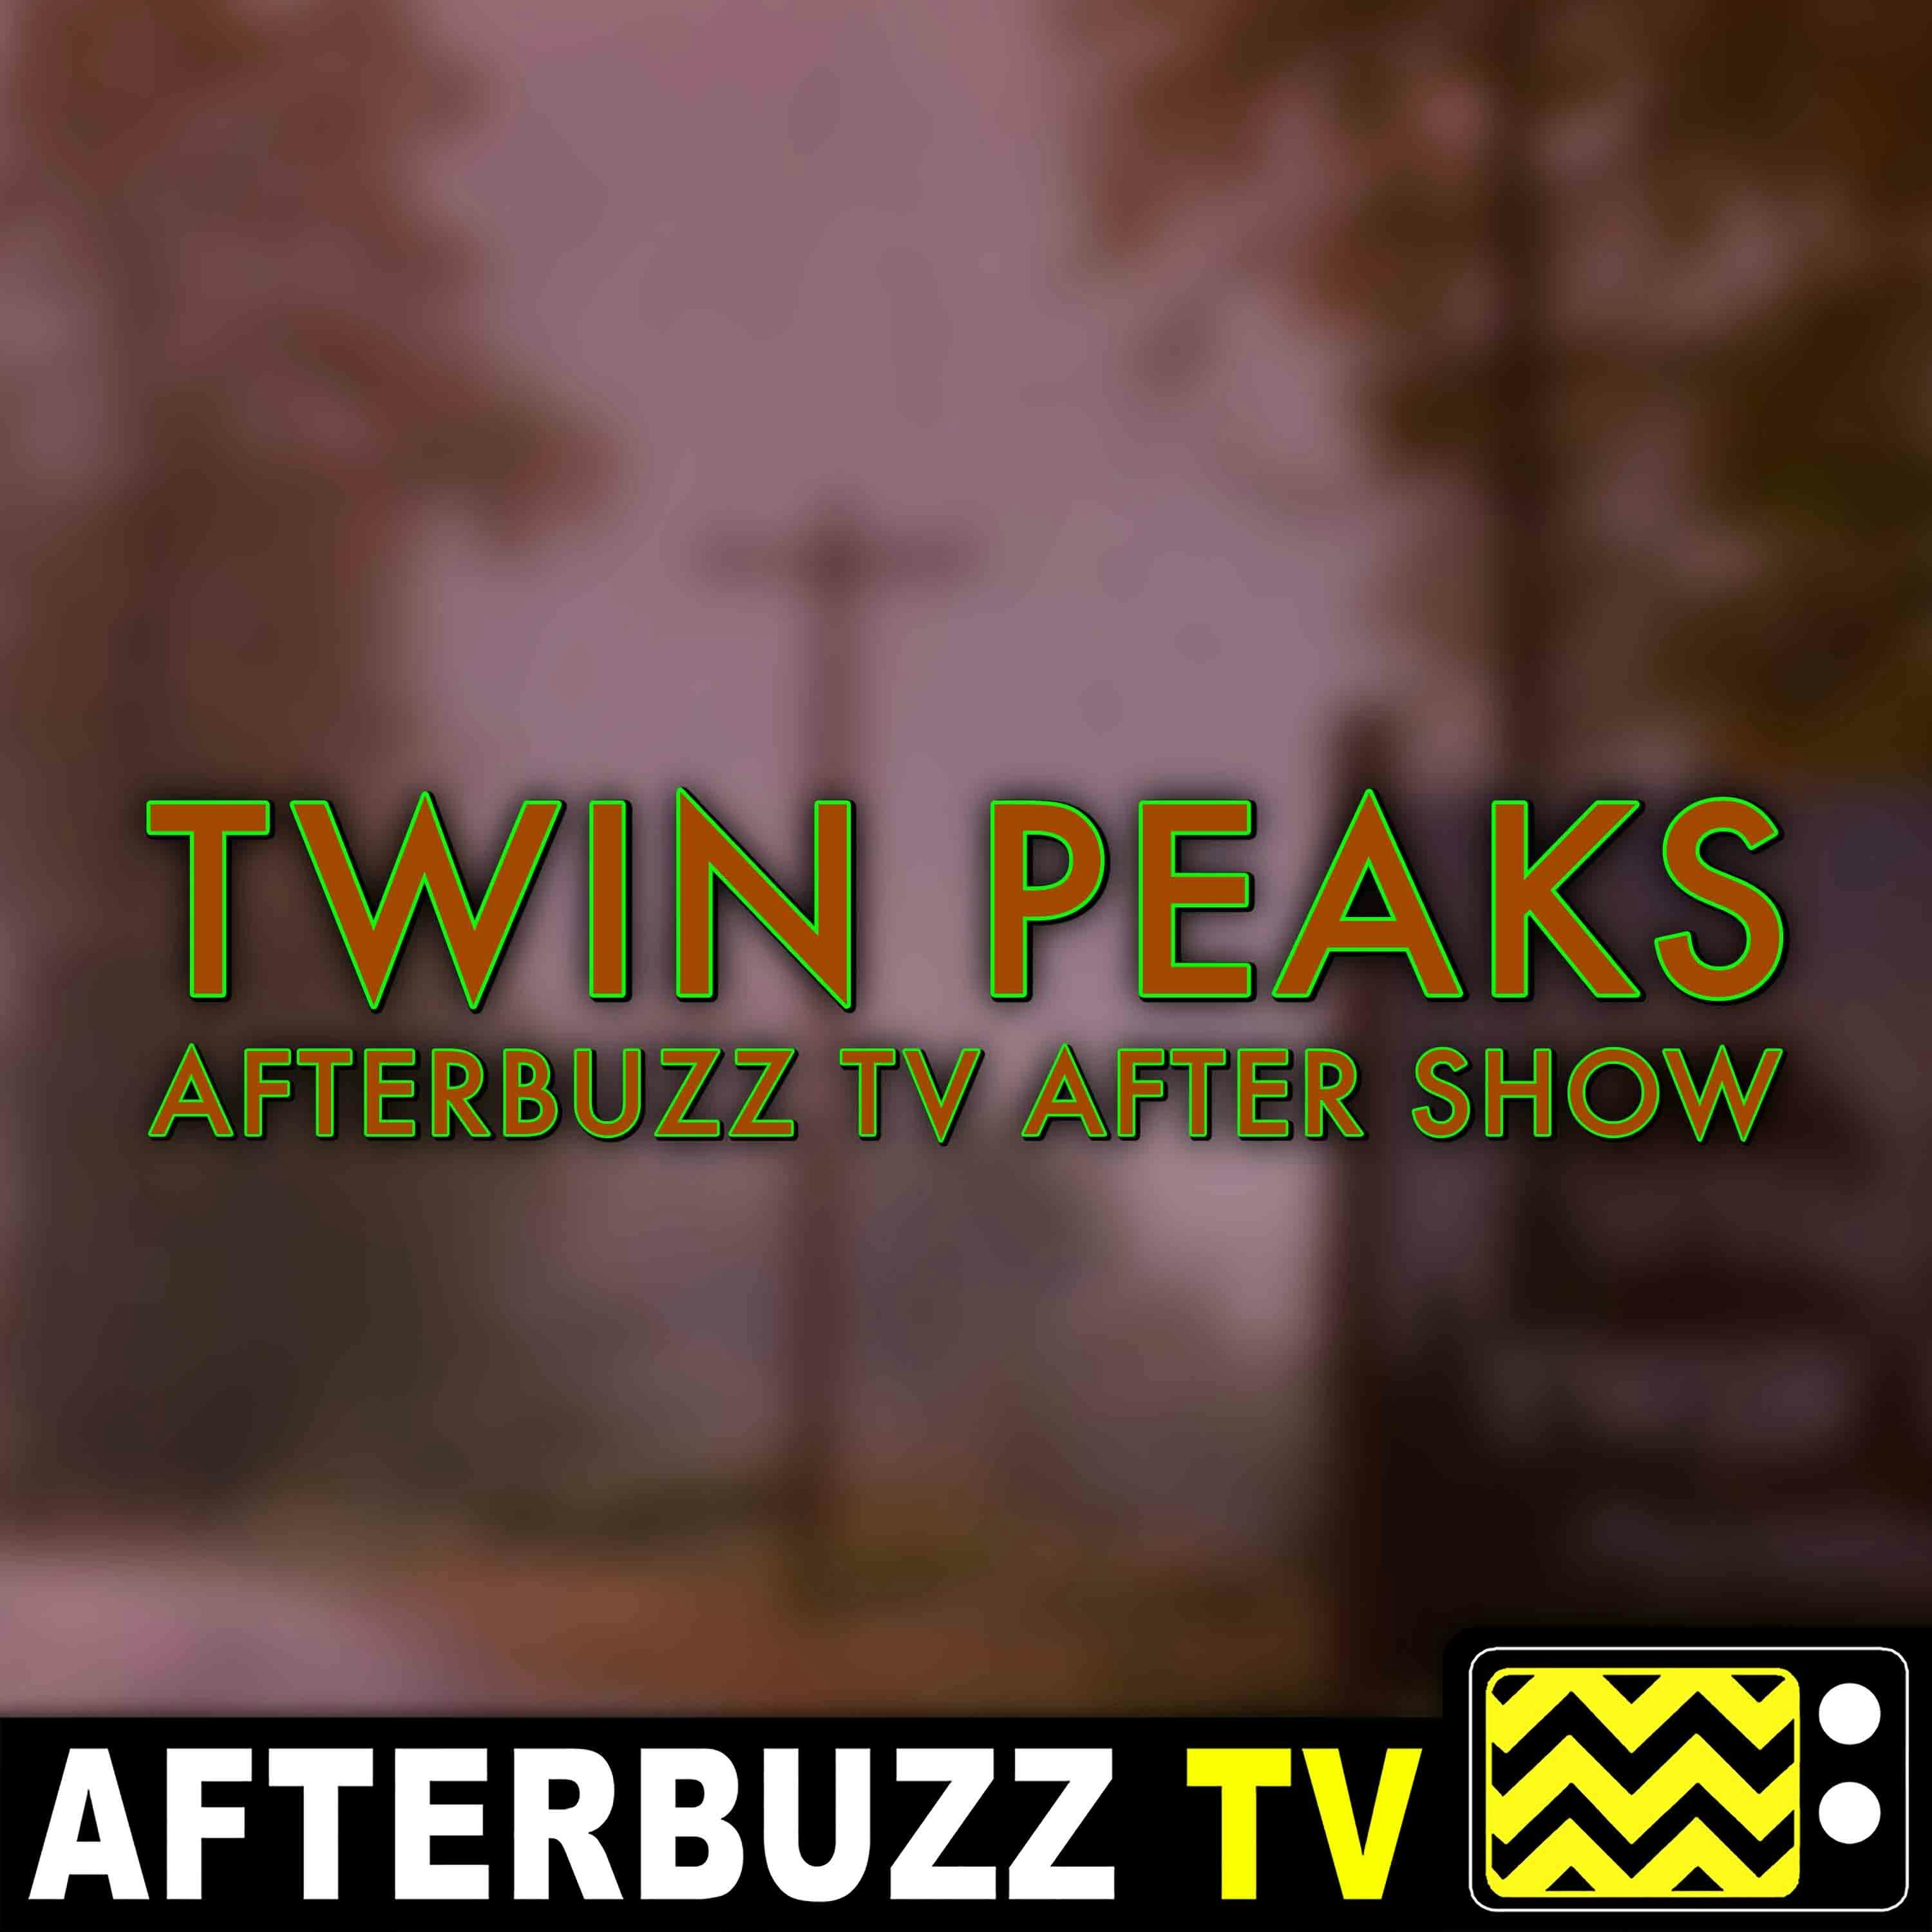 Twin Peaks S:3 | The Return, Parts 1 & 2 E:1 & E:2 | AfterBuzz TV AfterShow